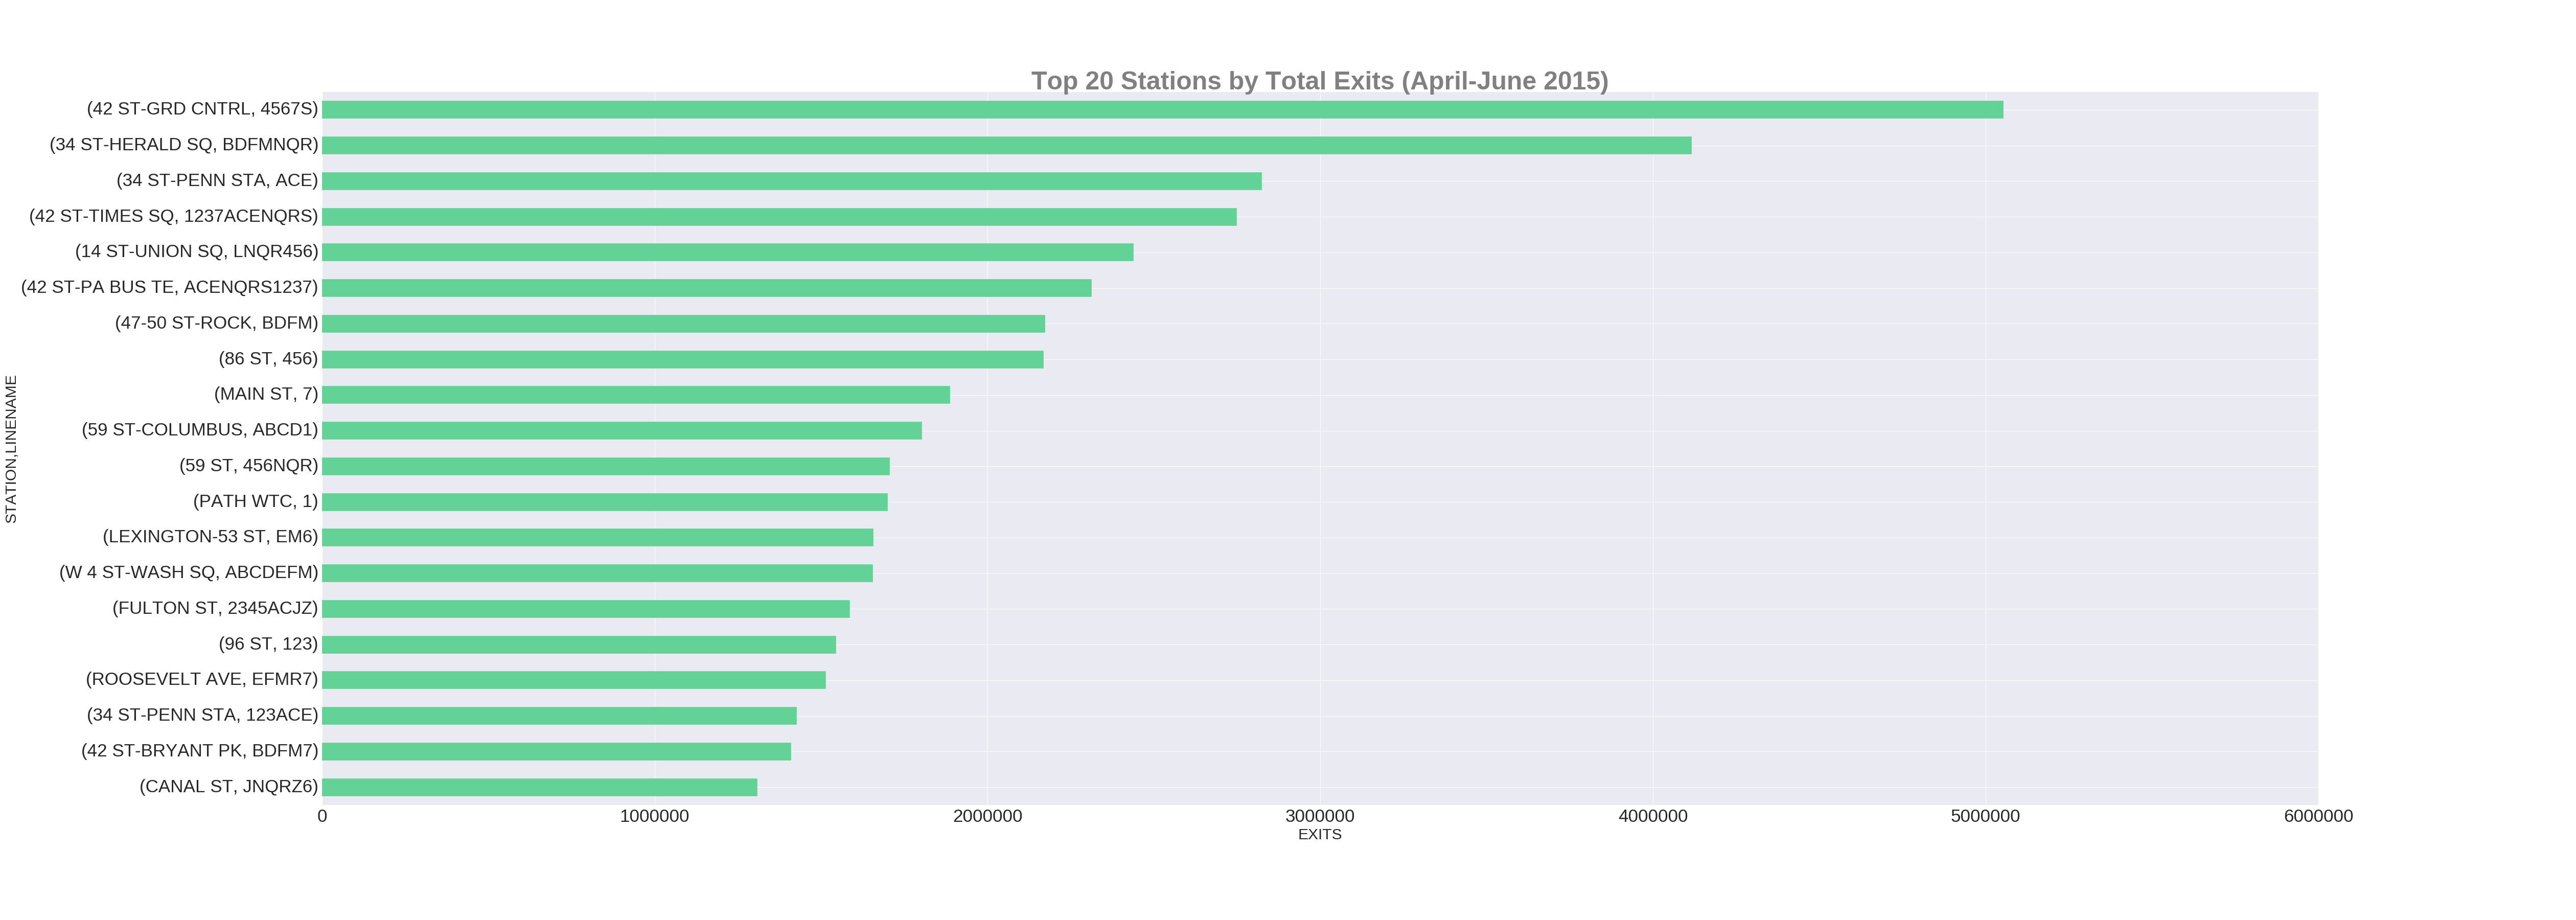 Top 20 Stations by total exits